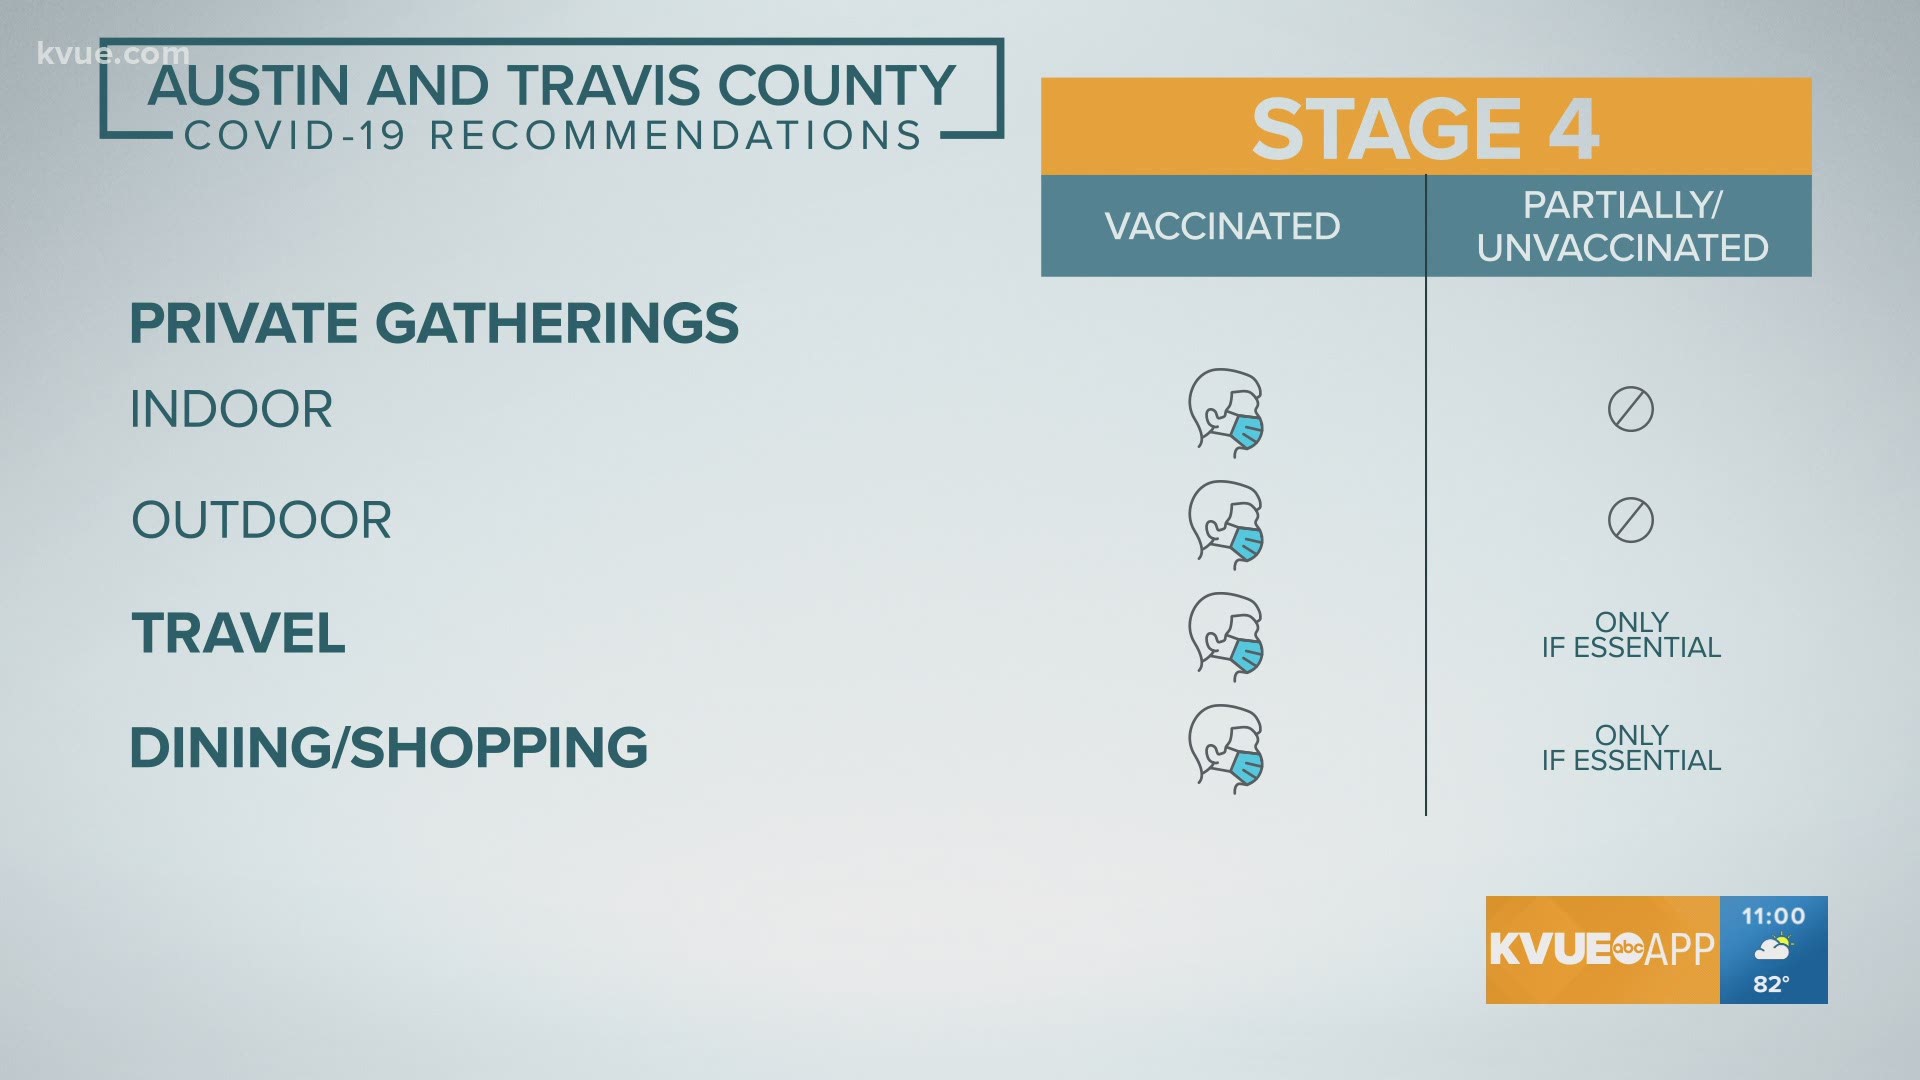 As COVID-19 continues to spread in Central Texas, Austin-Travis County is now under Stage 4 guidelines. KVUE's Conner Board explains what that means for residents.